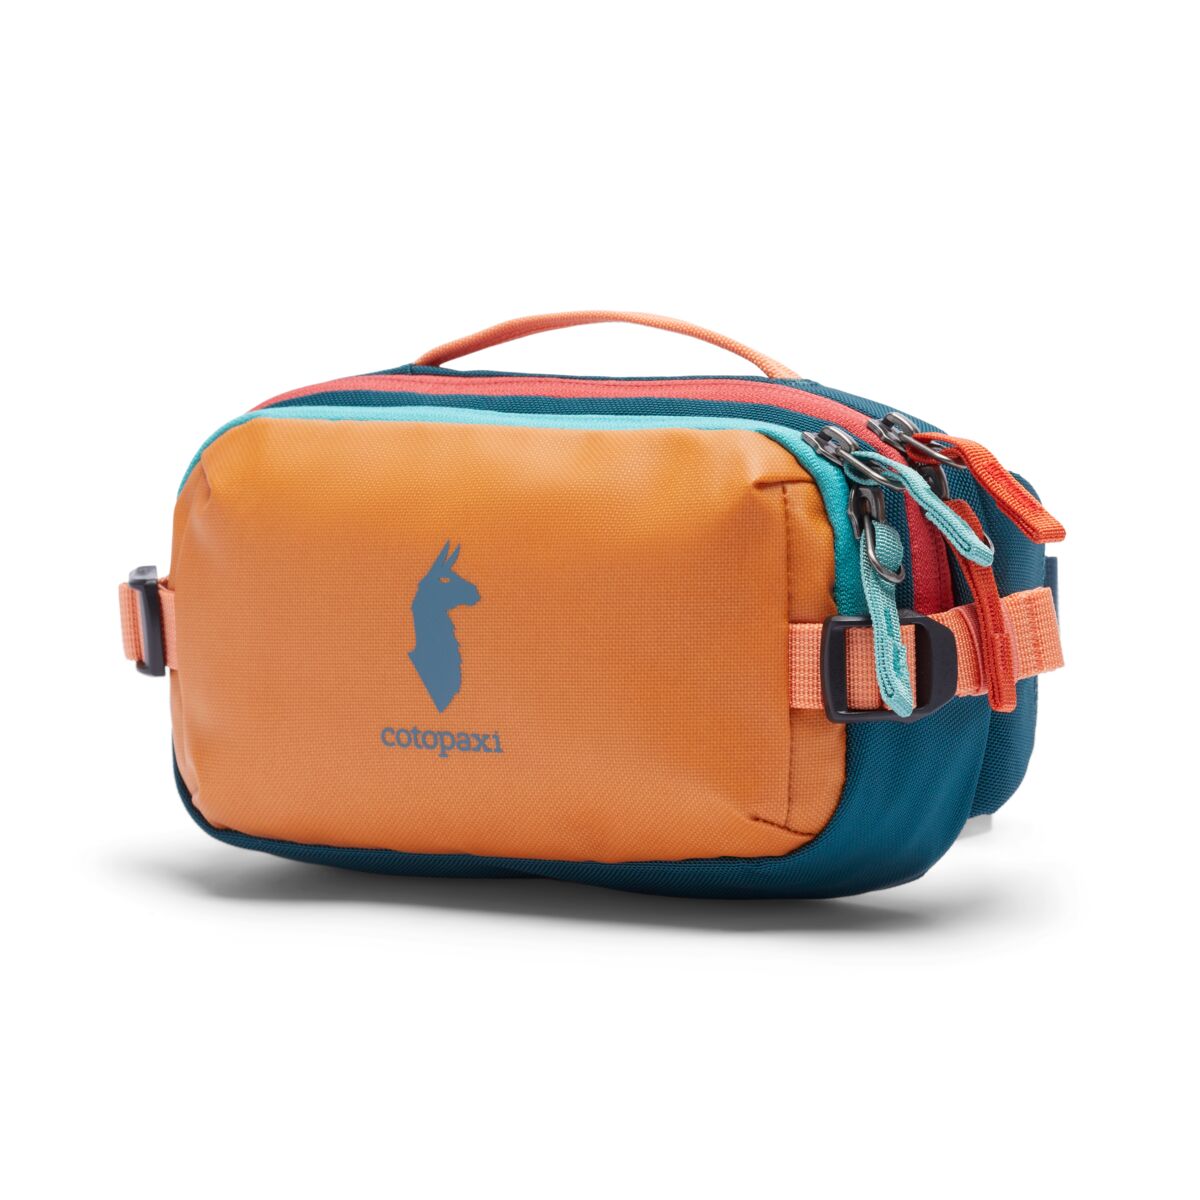 Cotopaxi Allpa X 1.5L Hip Pack in Tamarindo and Abyss – Cotopaxi UK